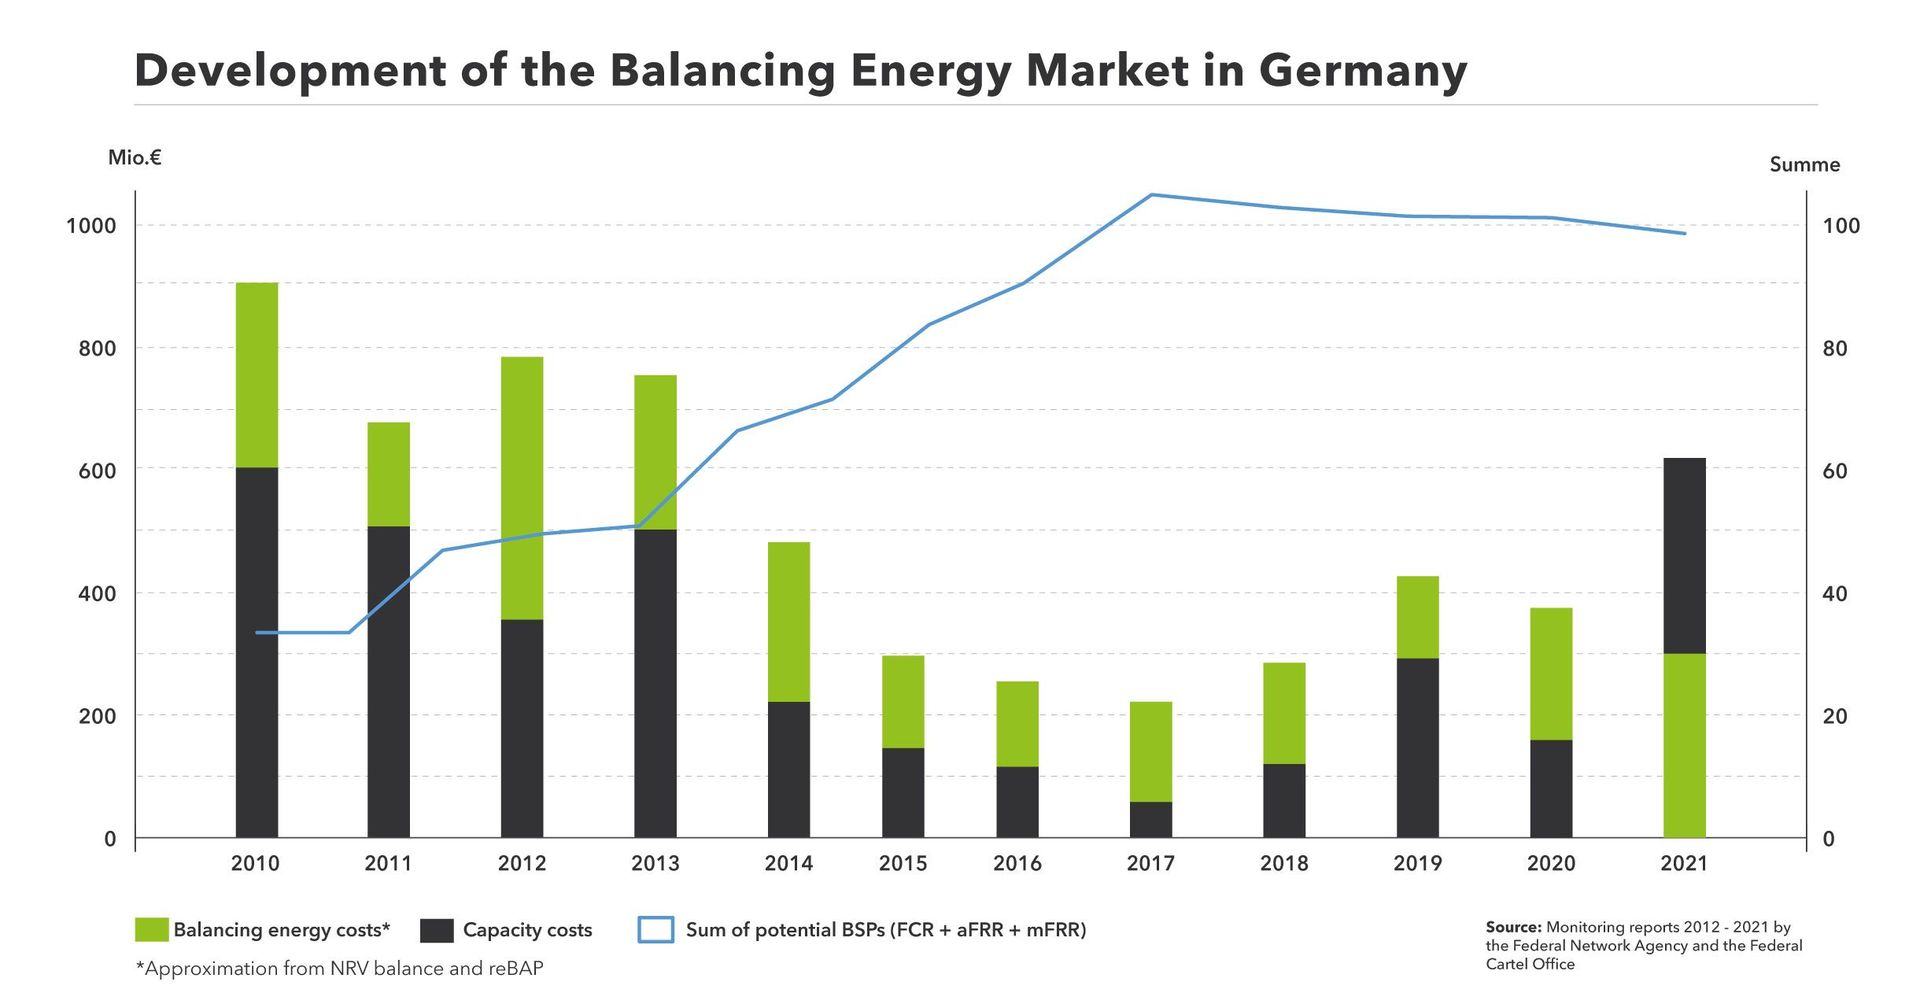 Development of capacities in the German balancing energy market since 2010 till today.